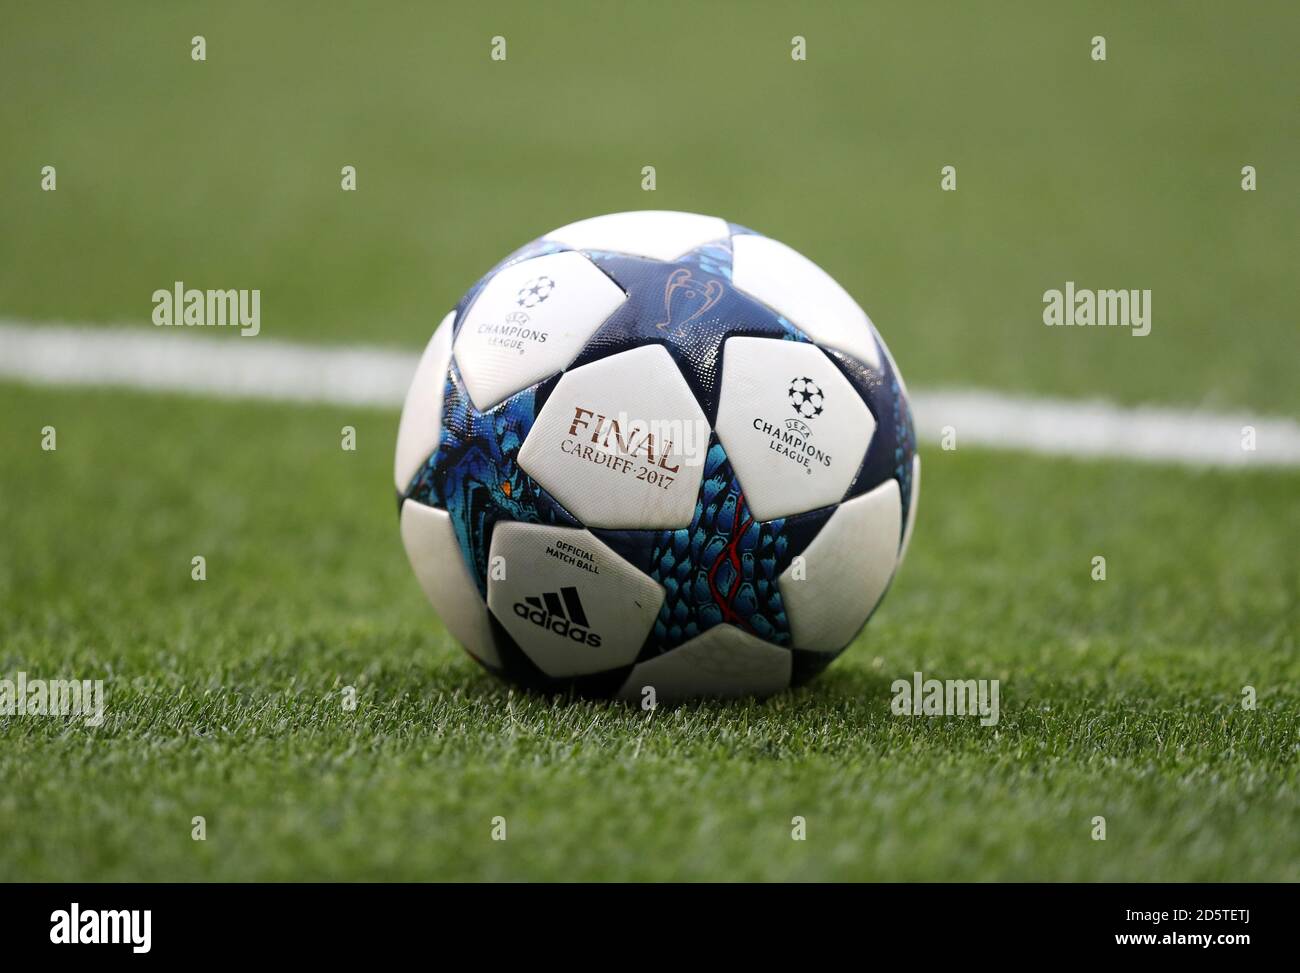 A view of an Adidas Finale Cardiff UEFA Champions League match ball Stock  Photo - Alamy